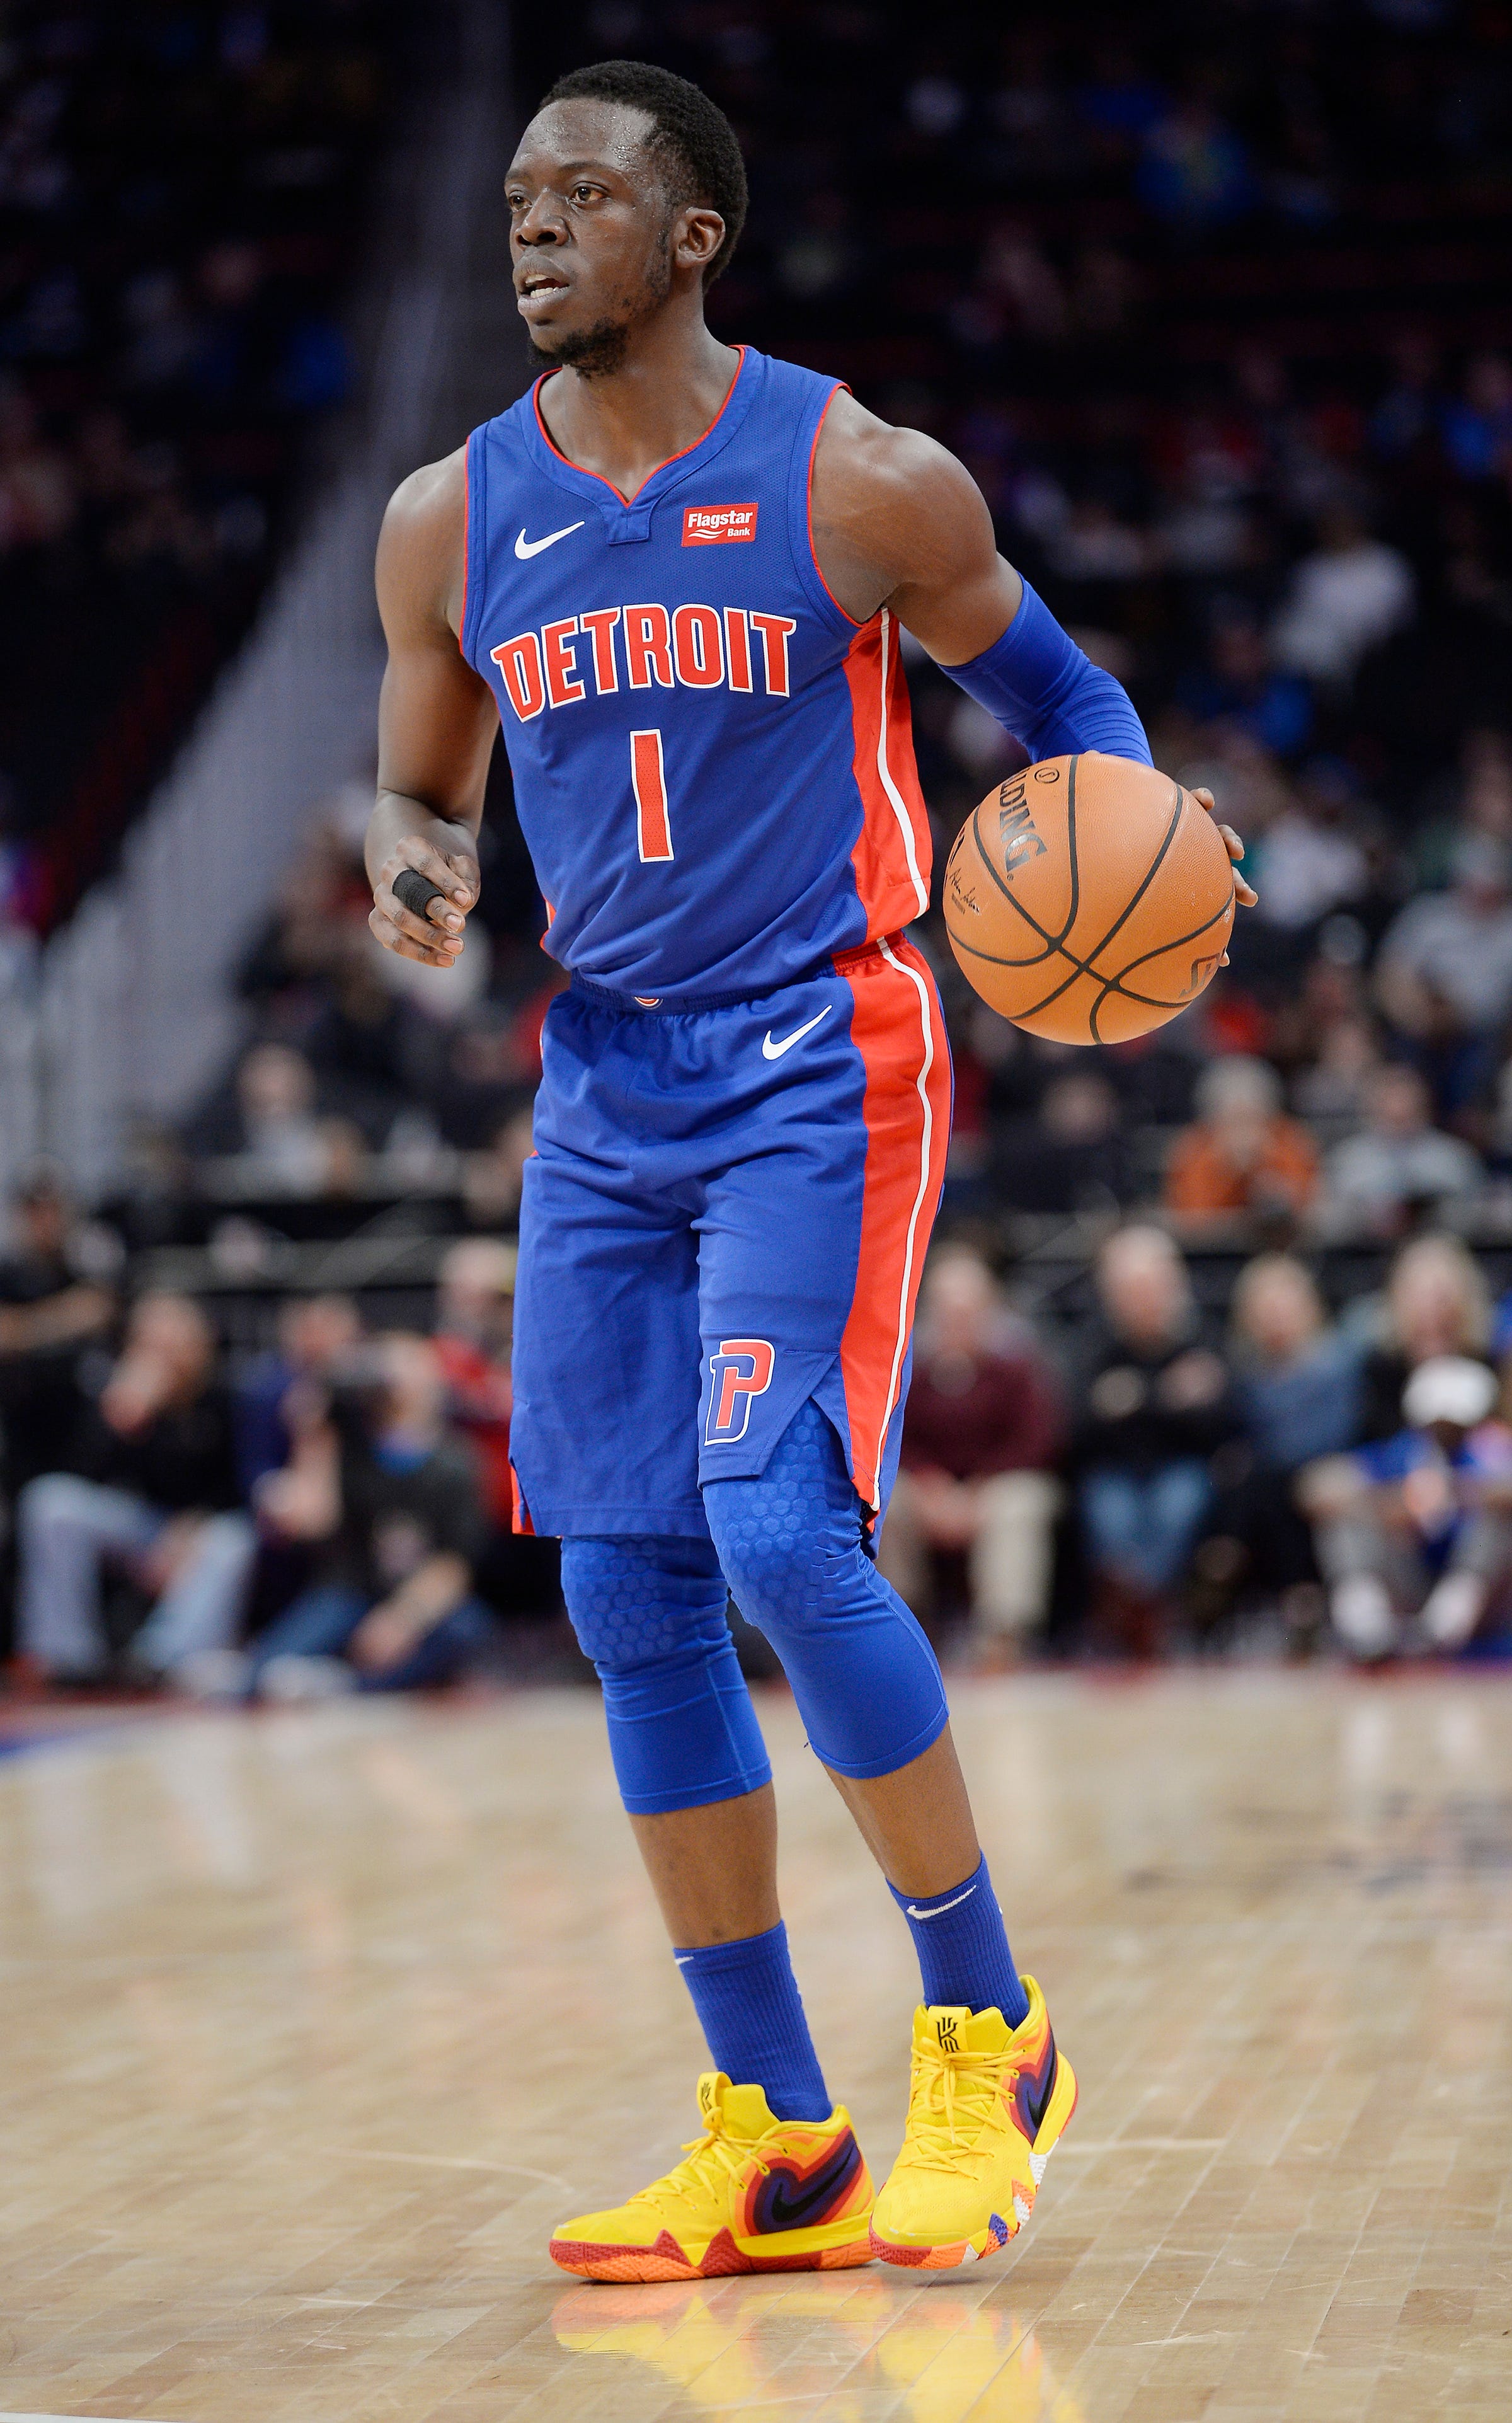 Reggie Jackson has reached double figures in scoring in 16 straight games.